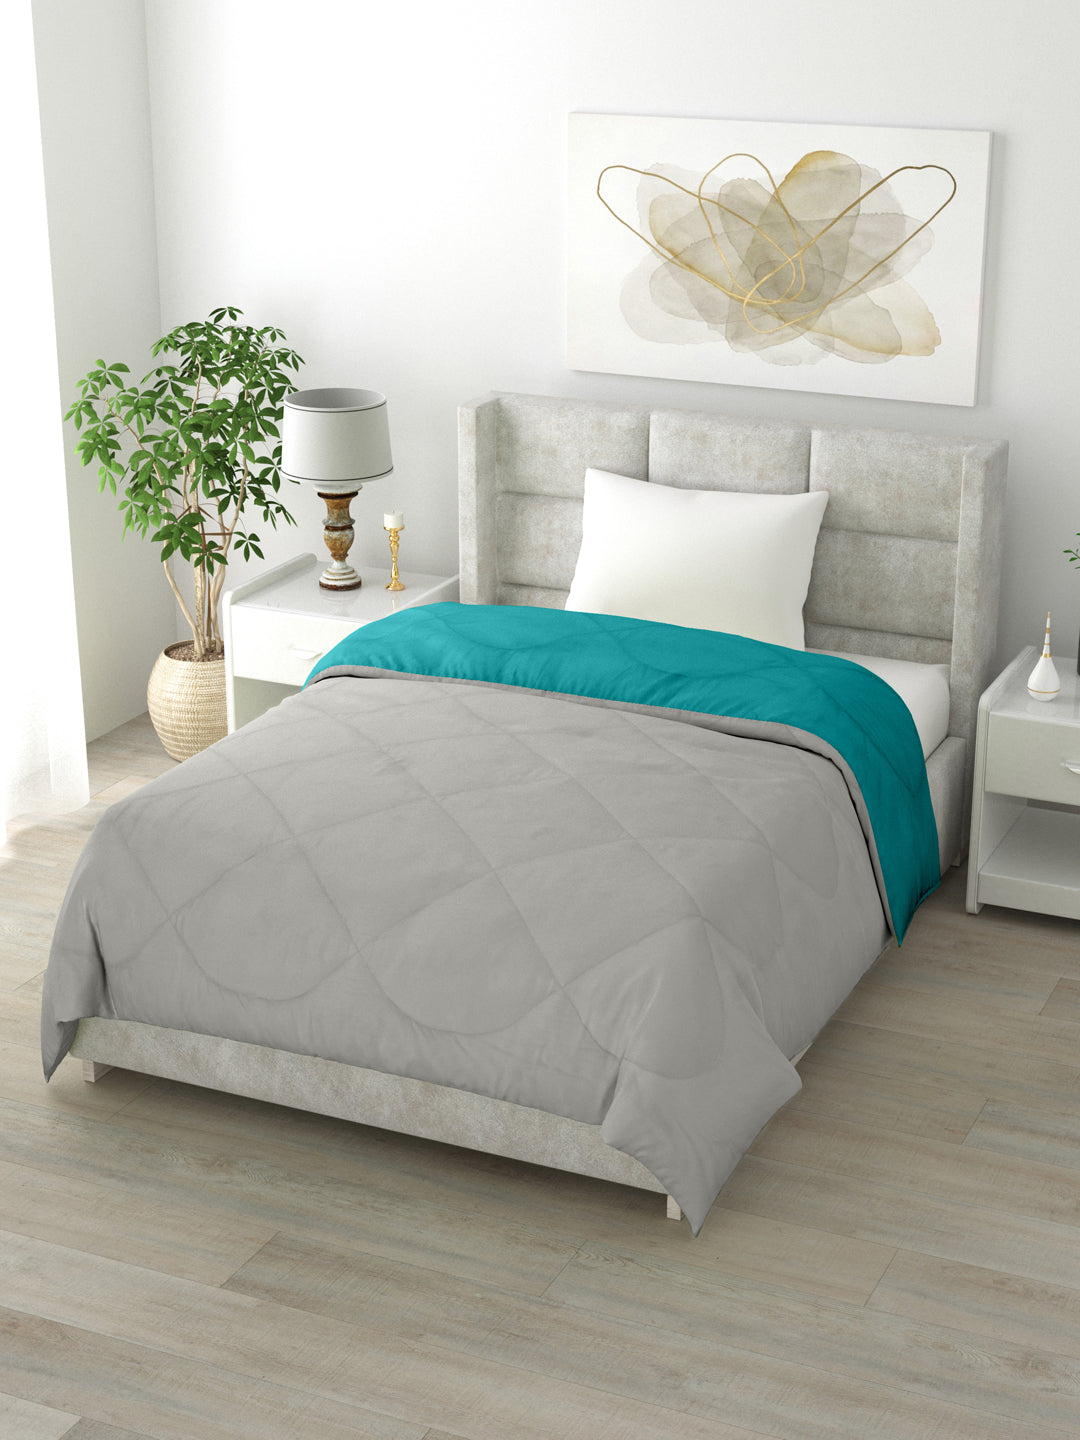 Reversible Single Bed Comforter 200 GSM 60x90 Inches (Cyan & Grey)